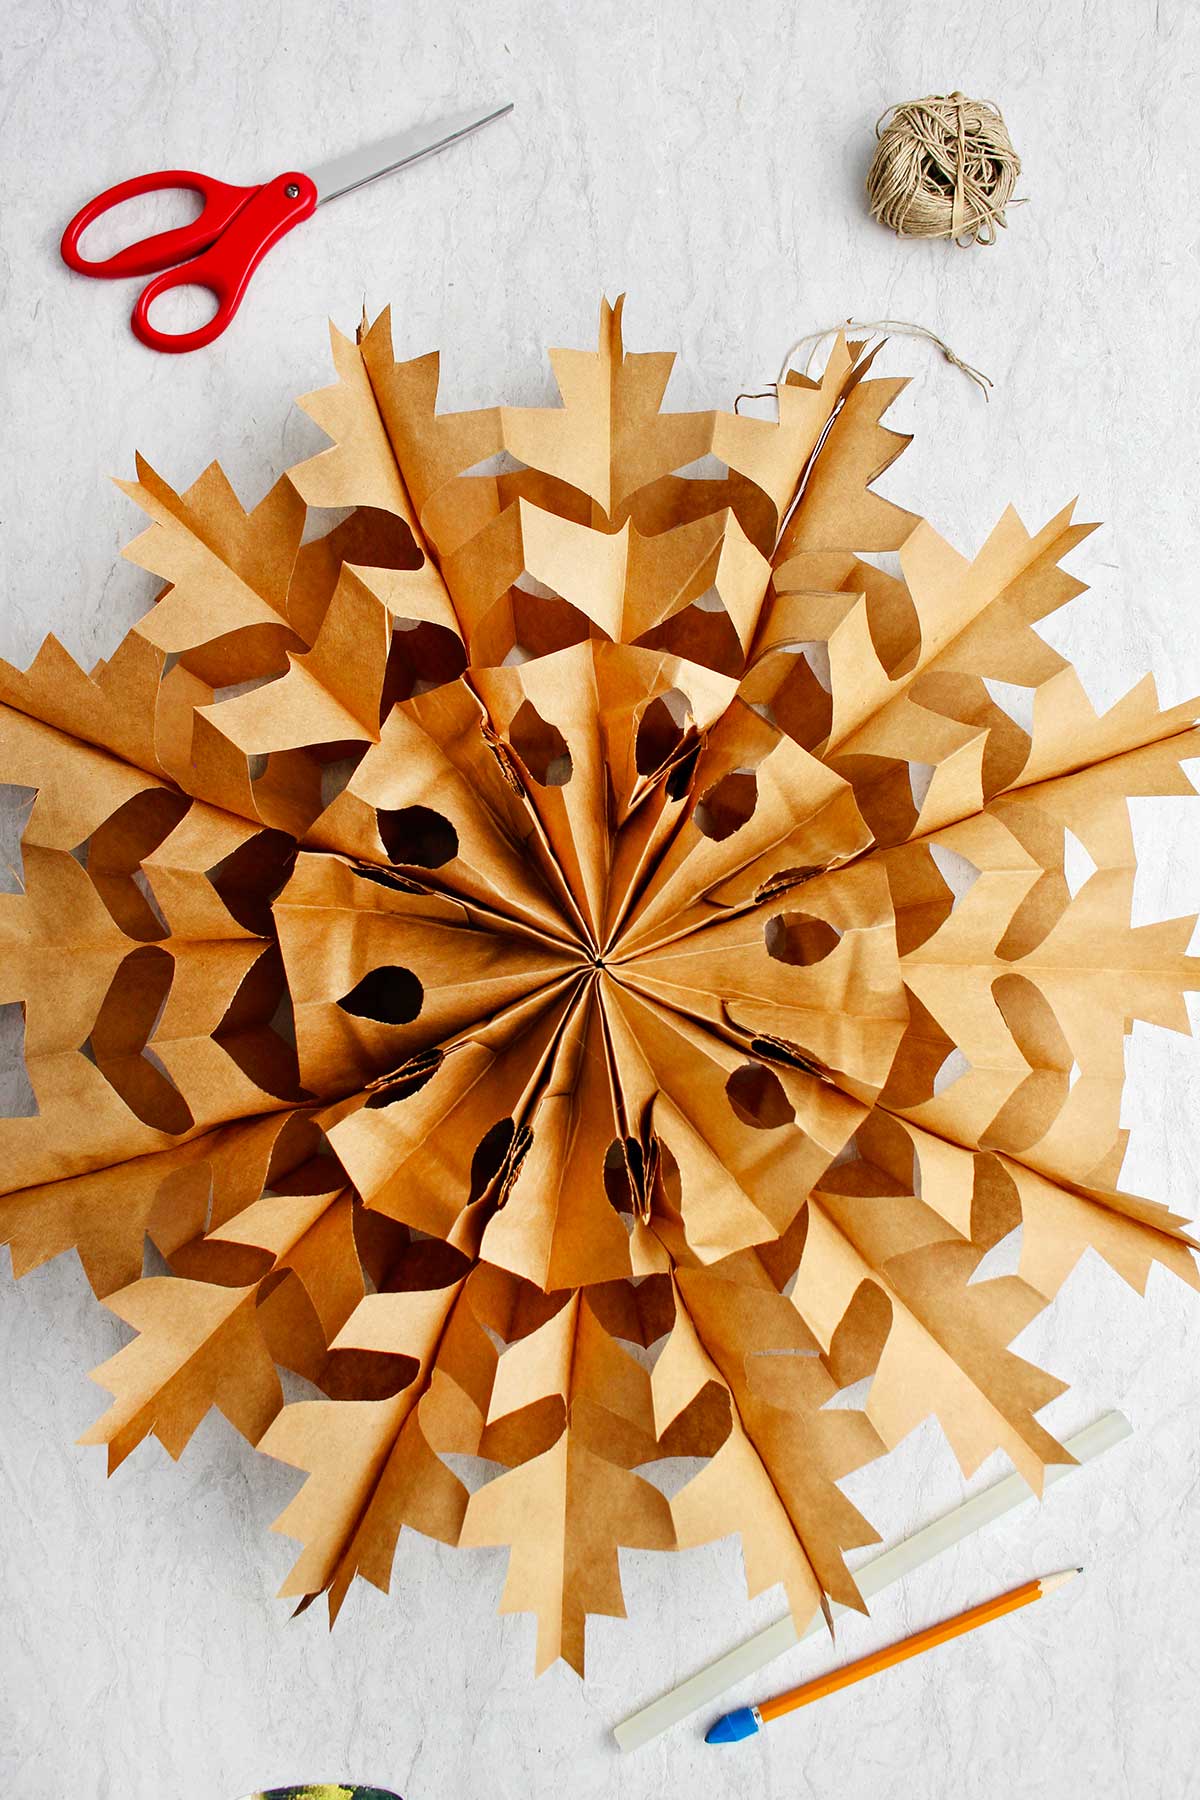 How to Make Paper Stars from Lunch Bags